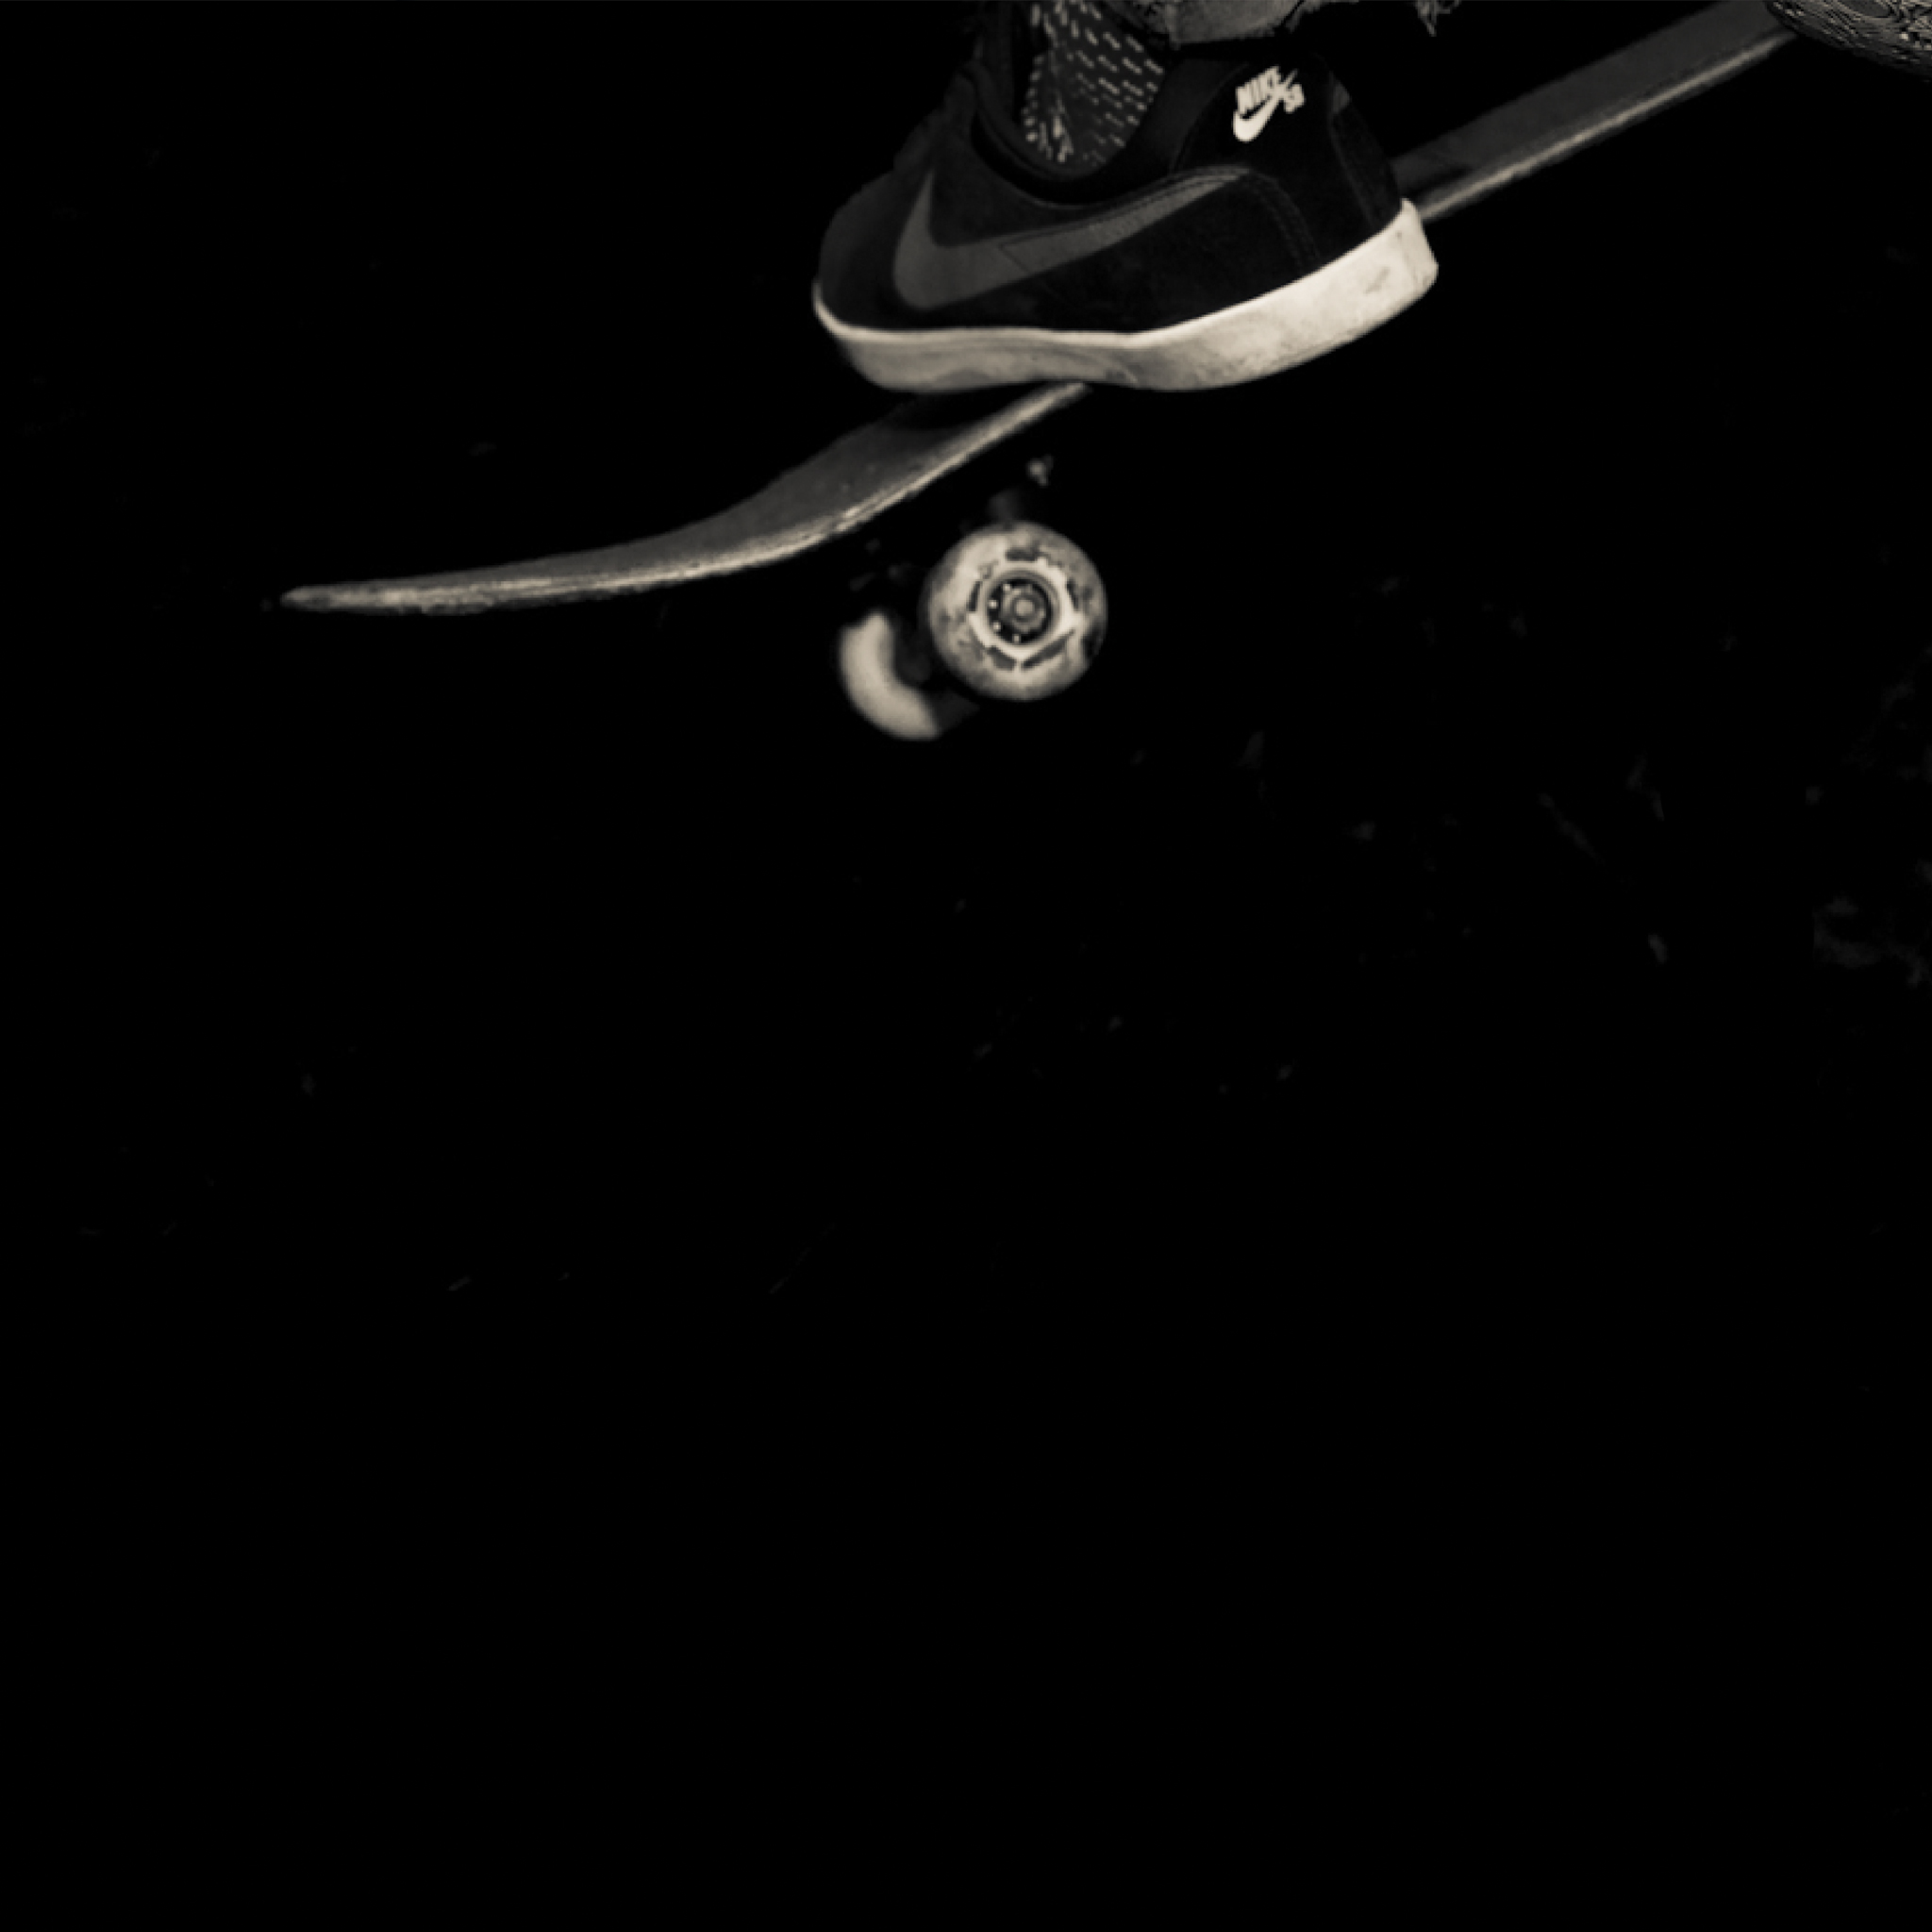 Related Pictures Skateboard Logo Wallpaper